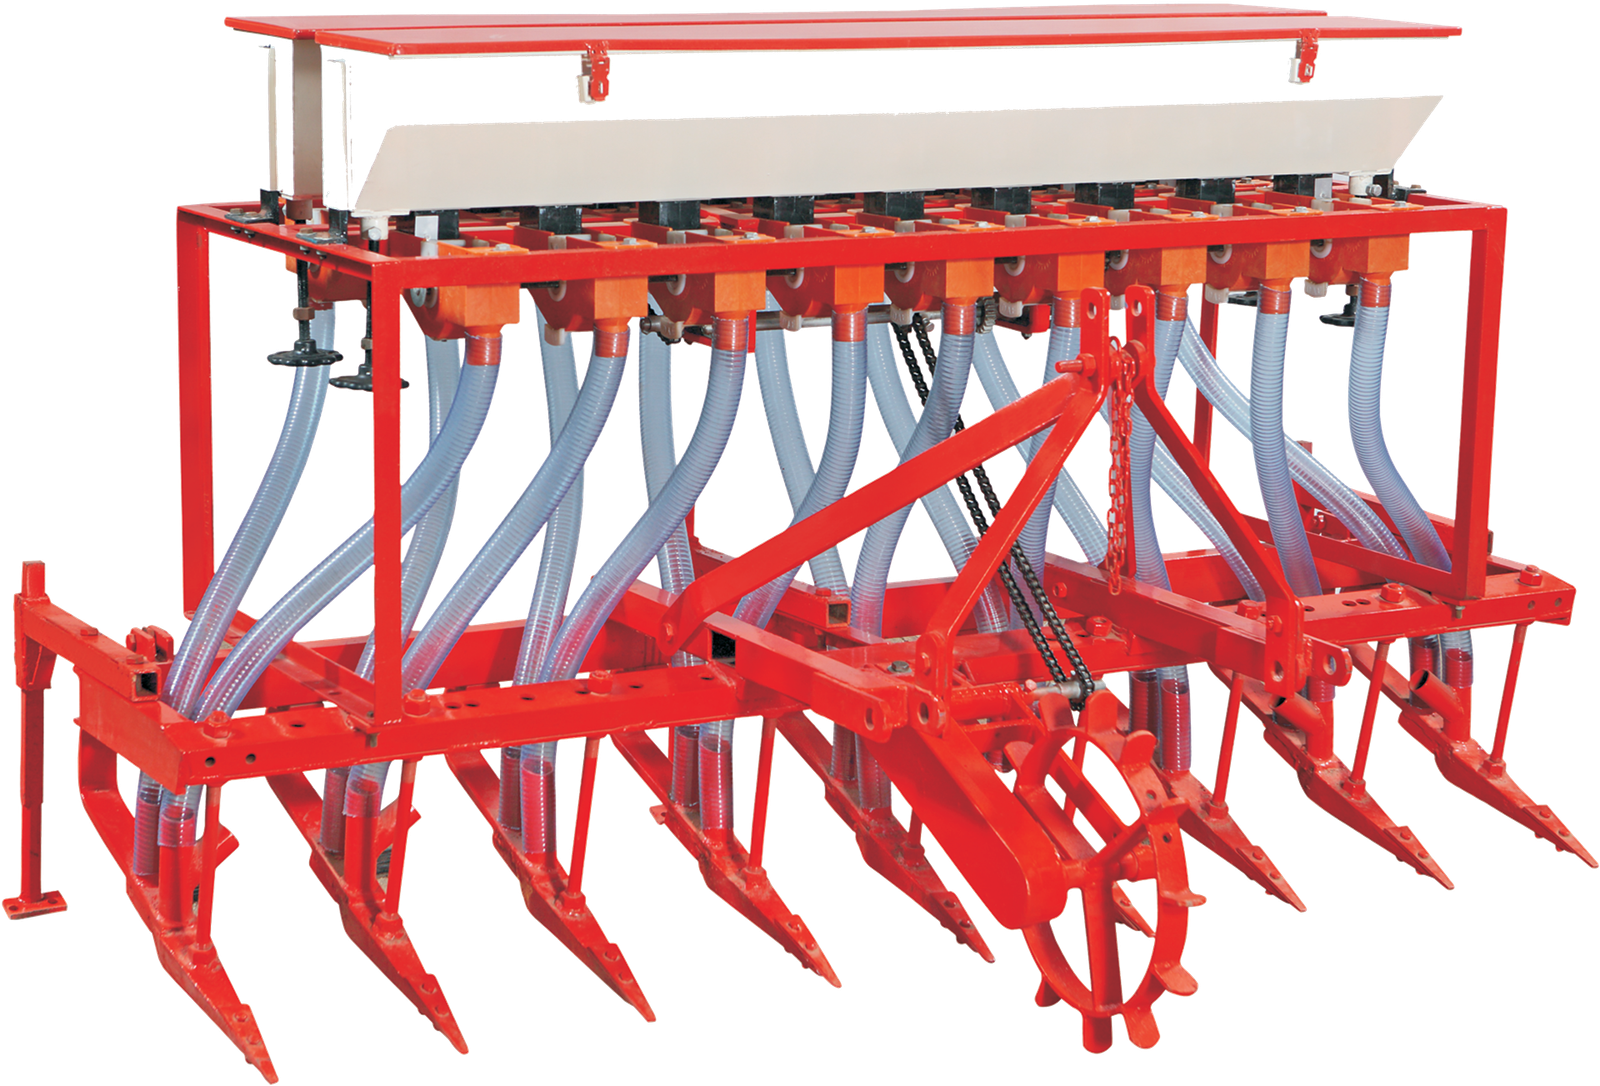 19 SEED DRILL